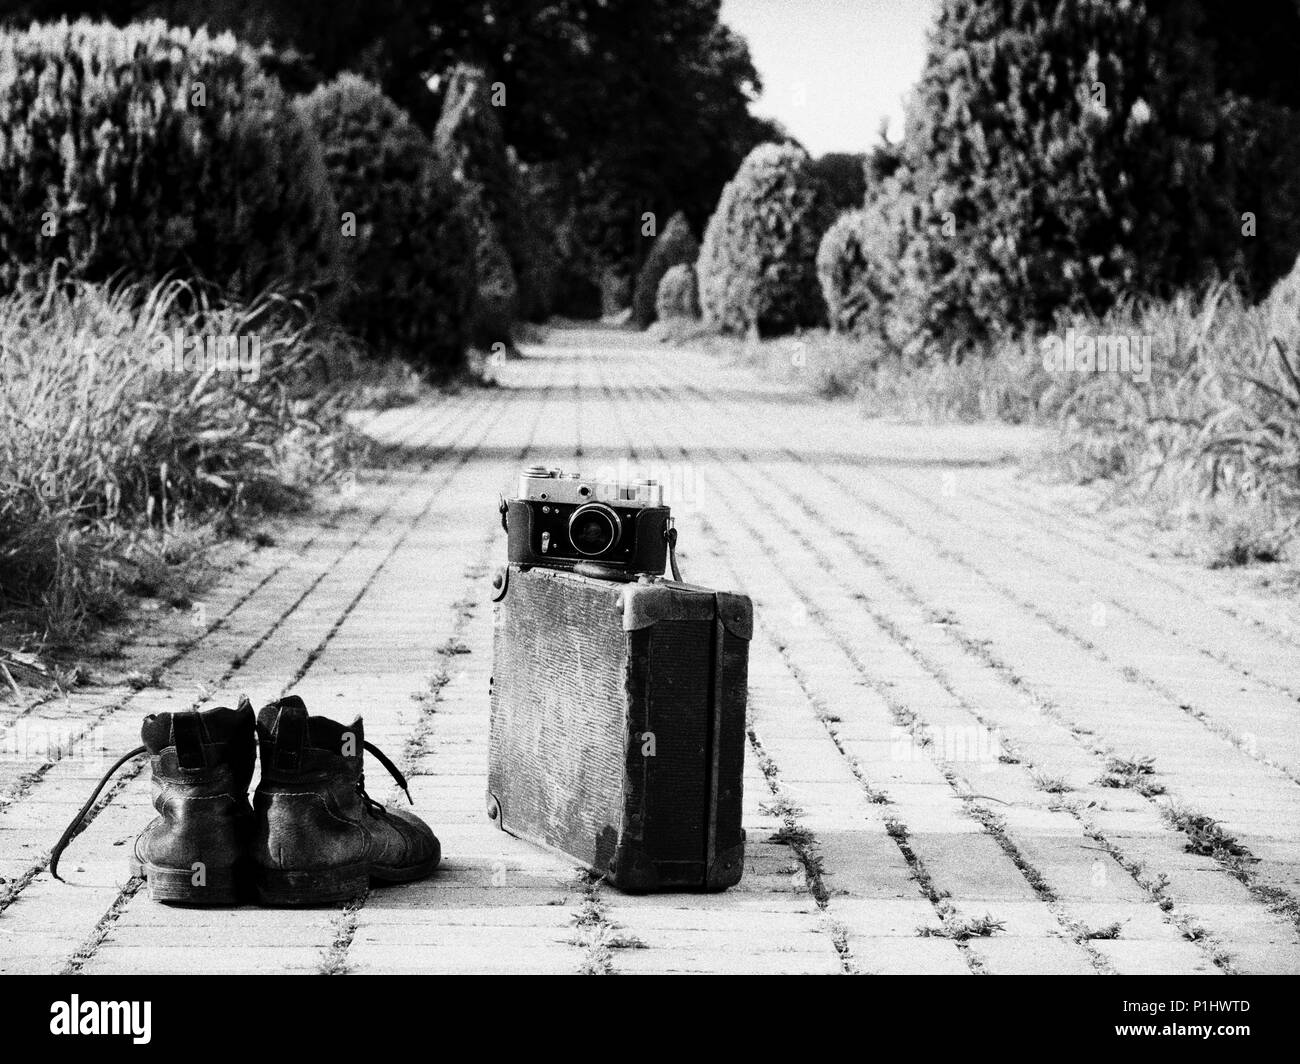 Leather boots, a vintage suitcase, and a film camera in its open leather case, in the middle of a brick road. A B/W photo. Grain noise added. Stock Photo